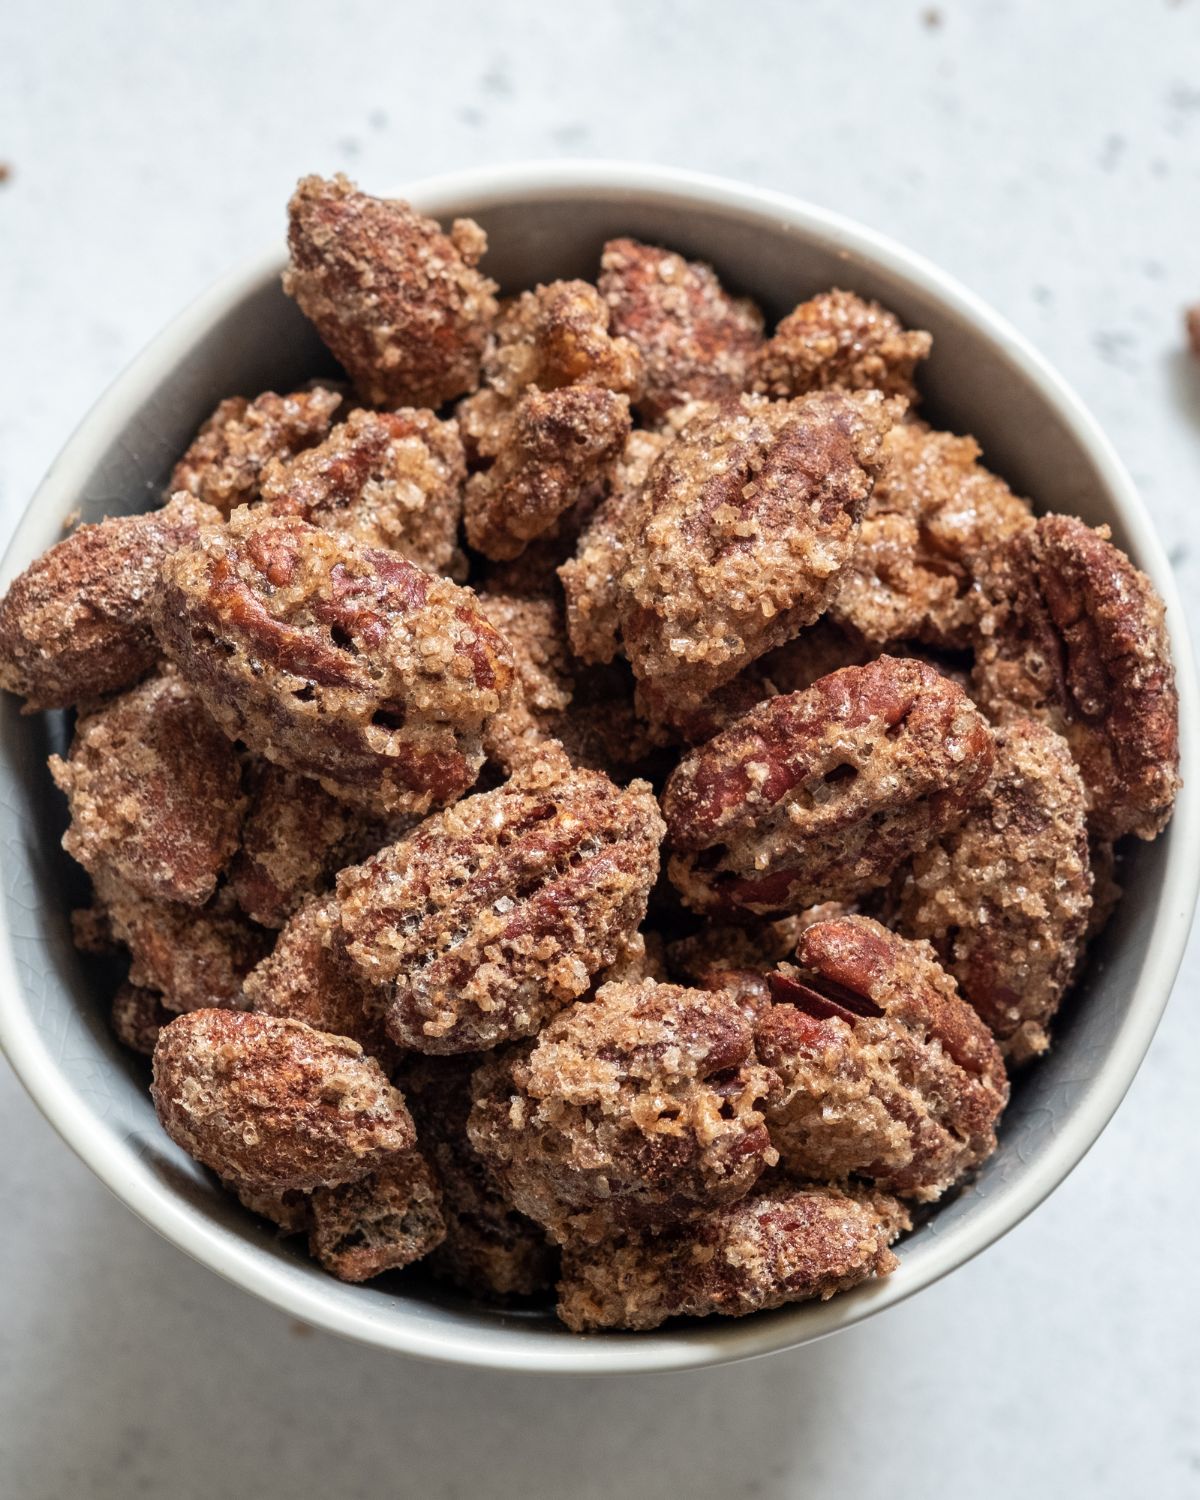 A close up on the cinnamon roasted pecans.